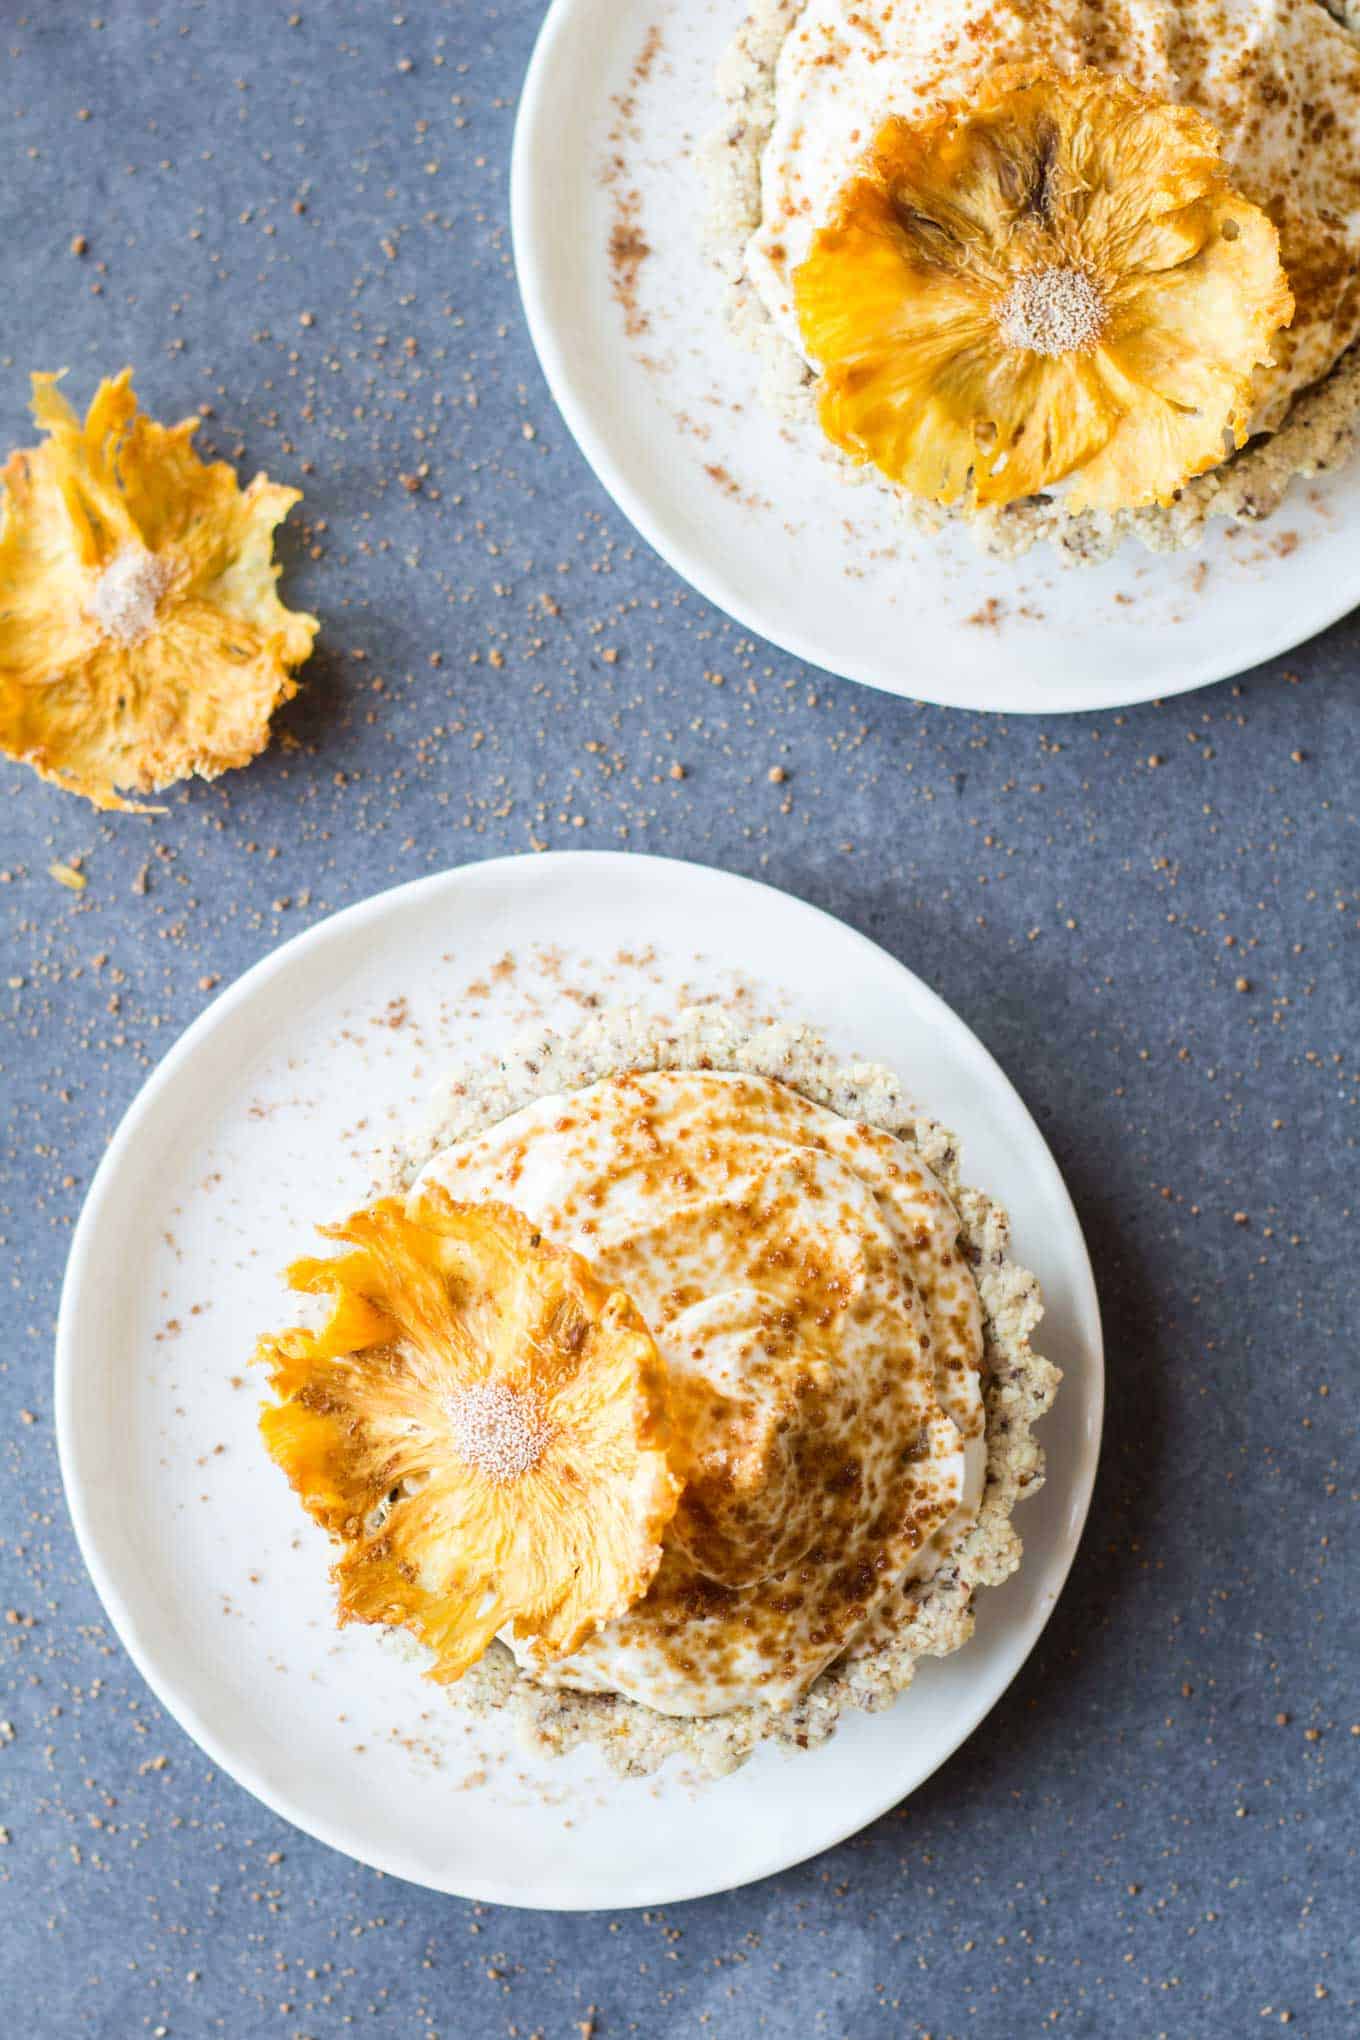 Pineapple coconut tartlets recipe! Green Healthy Cooking's beautiful and elegant recipe for dairy free pineapple coconut tartlets topped with edible pineapple "flowers." An amazing dessert!